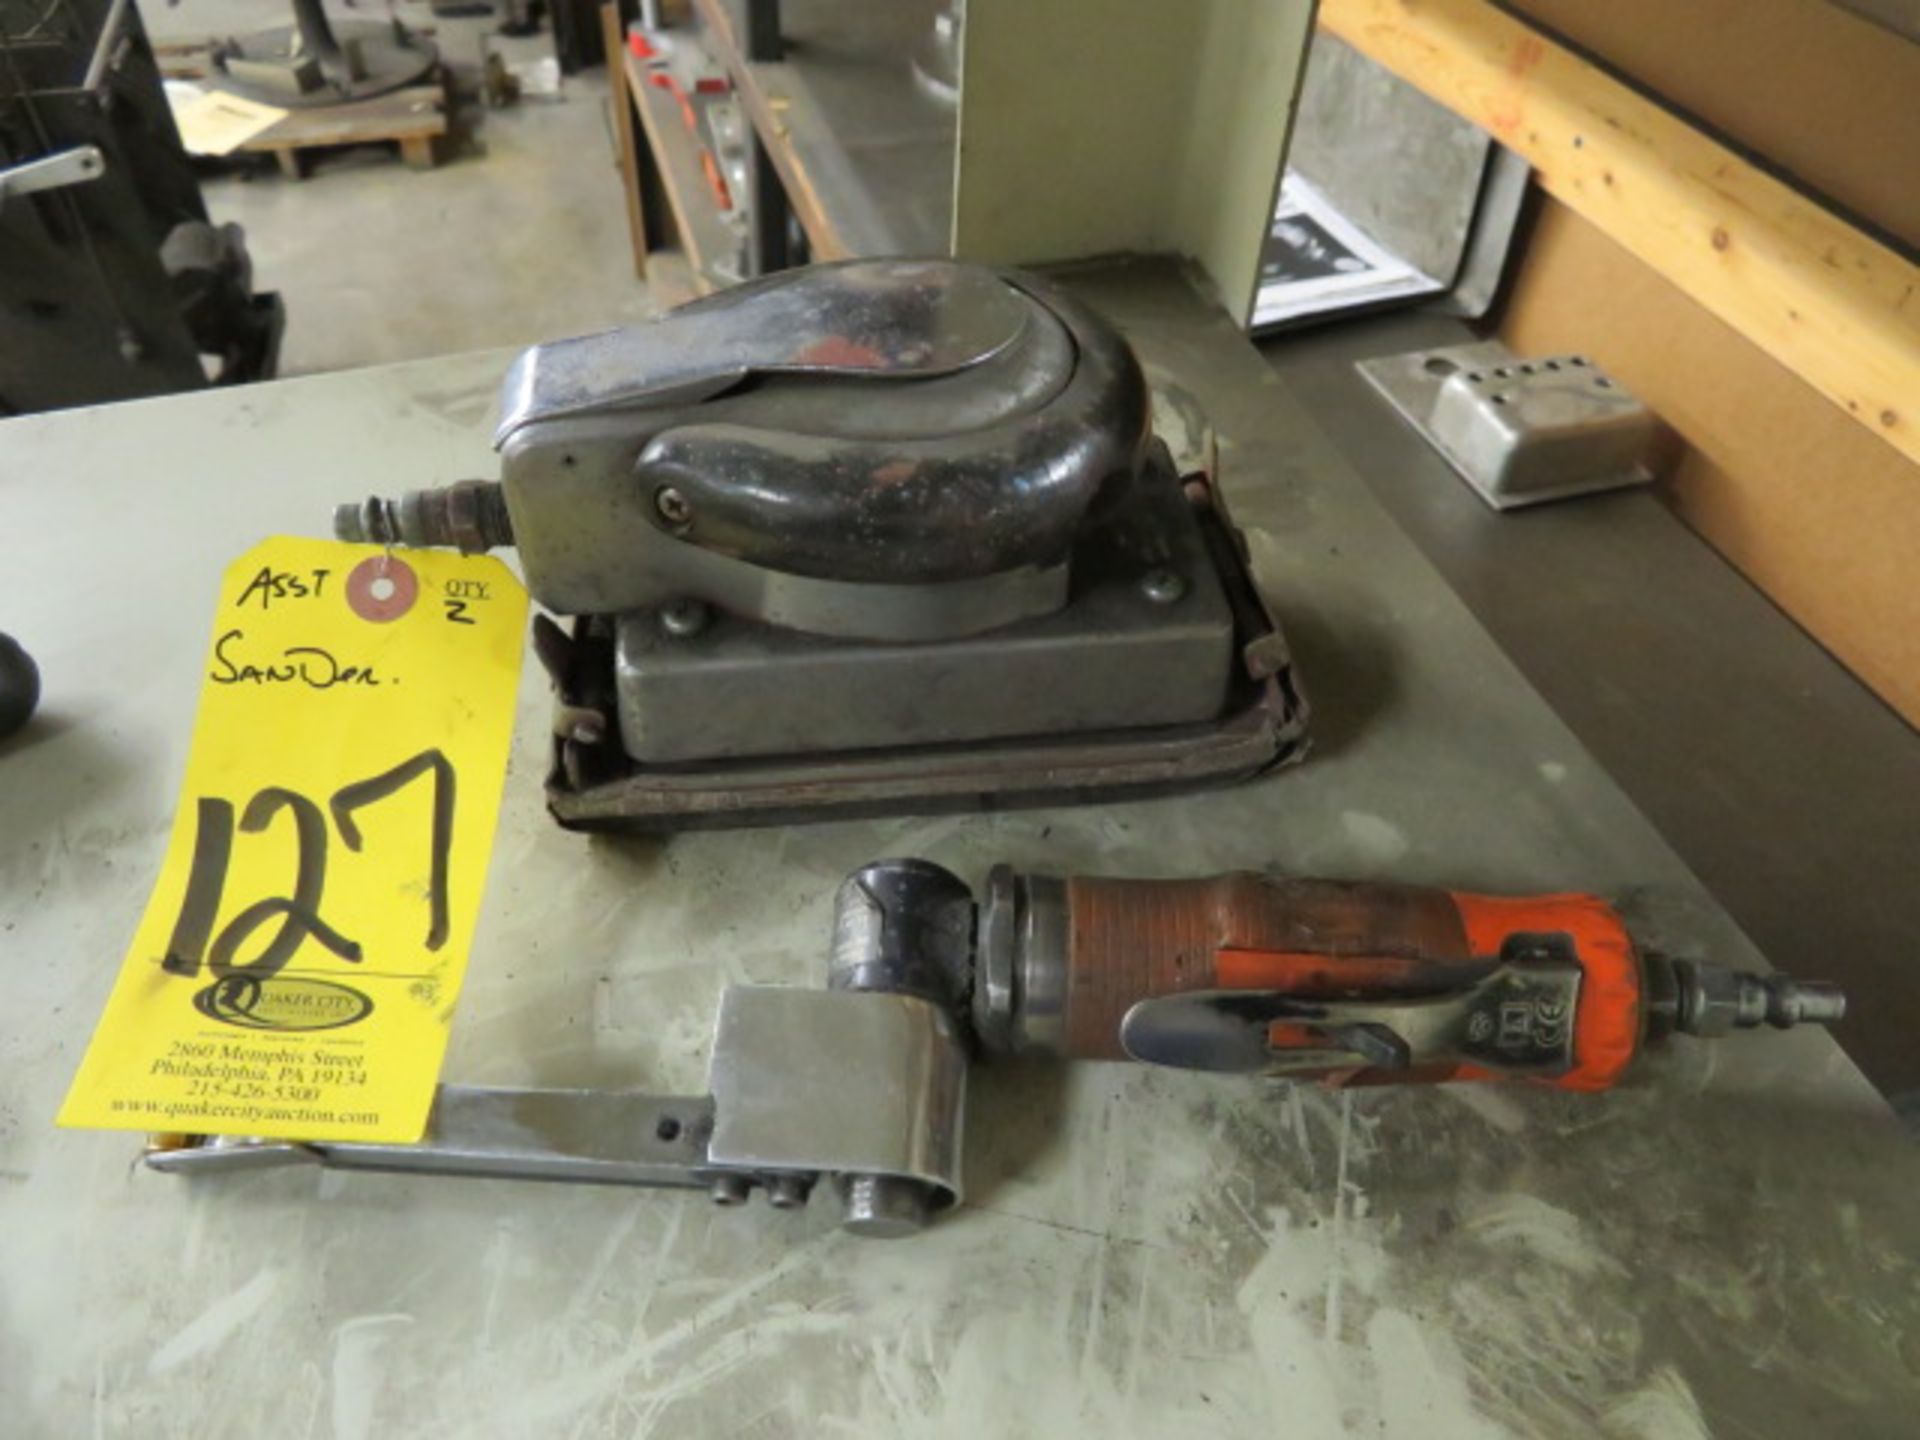 (1) PALM AND SMALL BELT SANDER